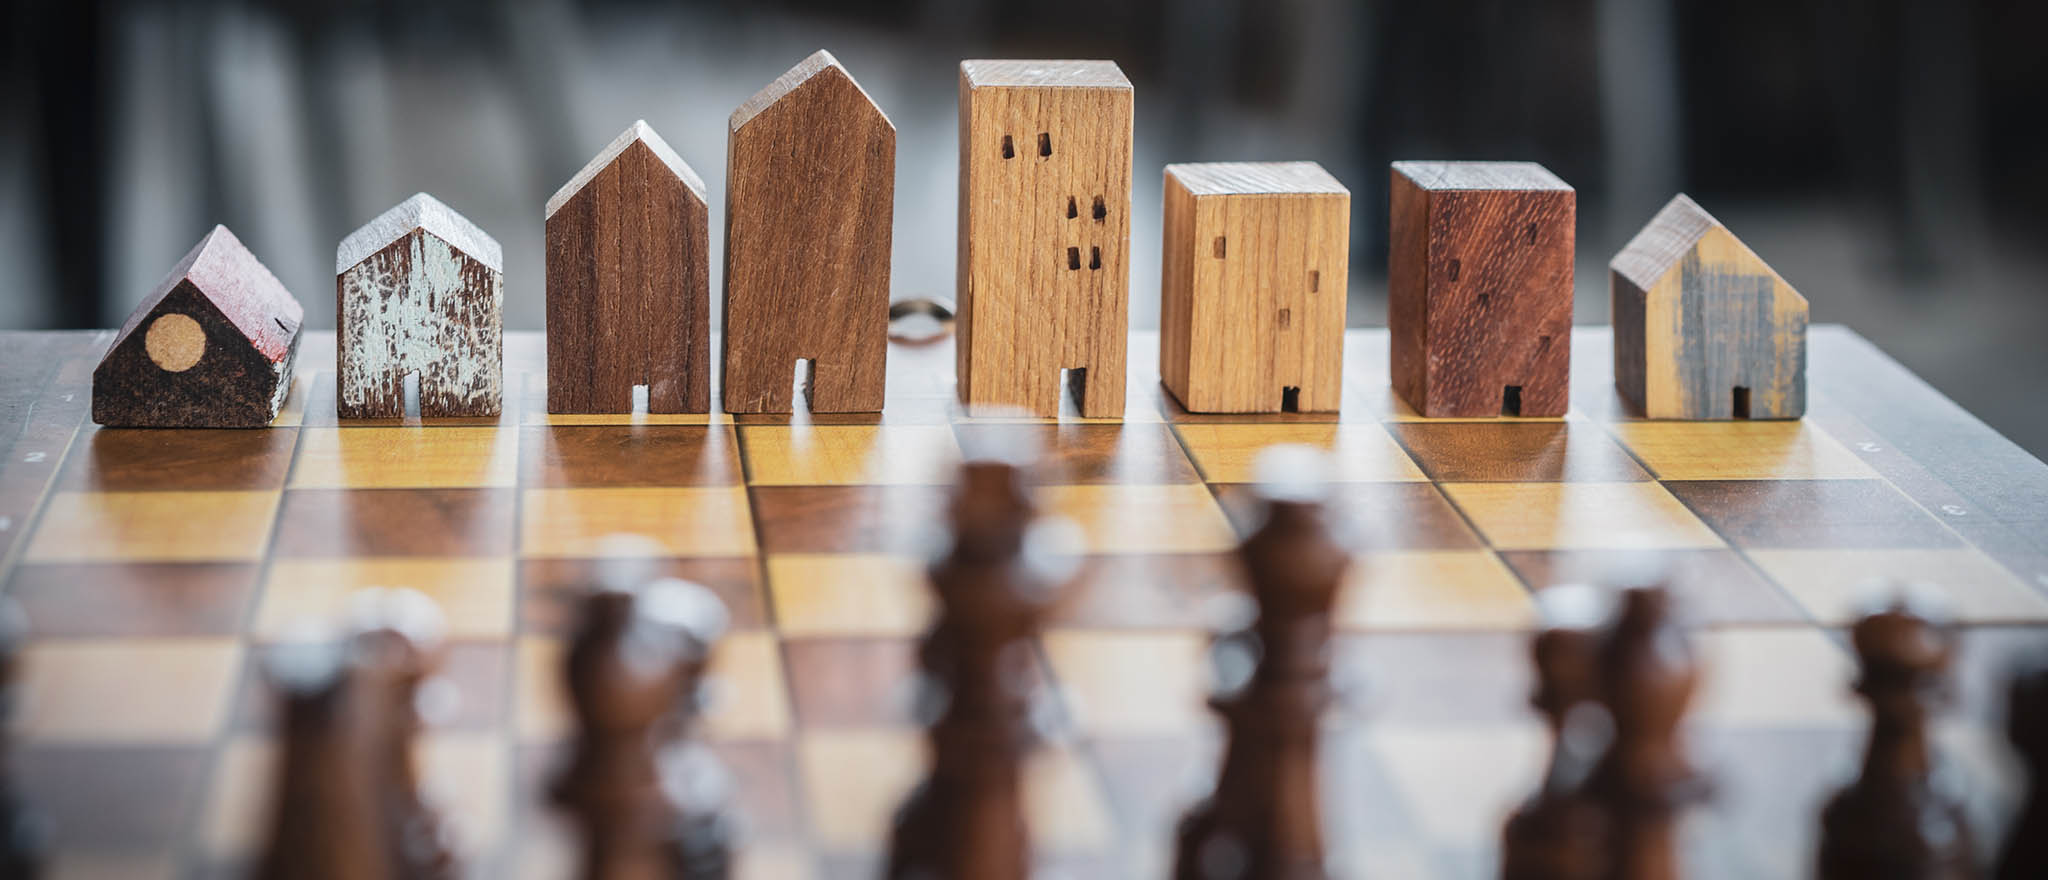 Chess board with pieces depicted as corporate real estate buildings